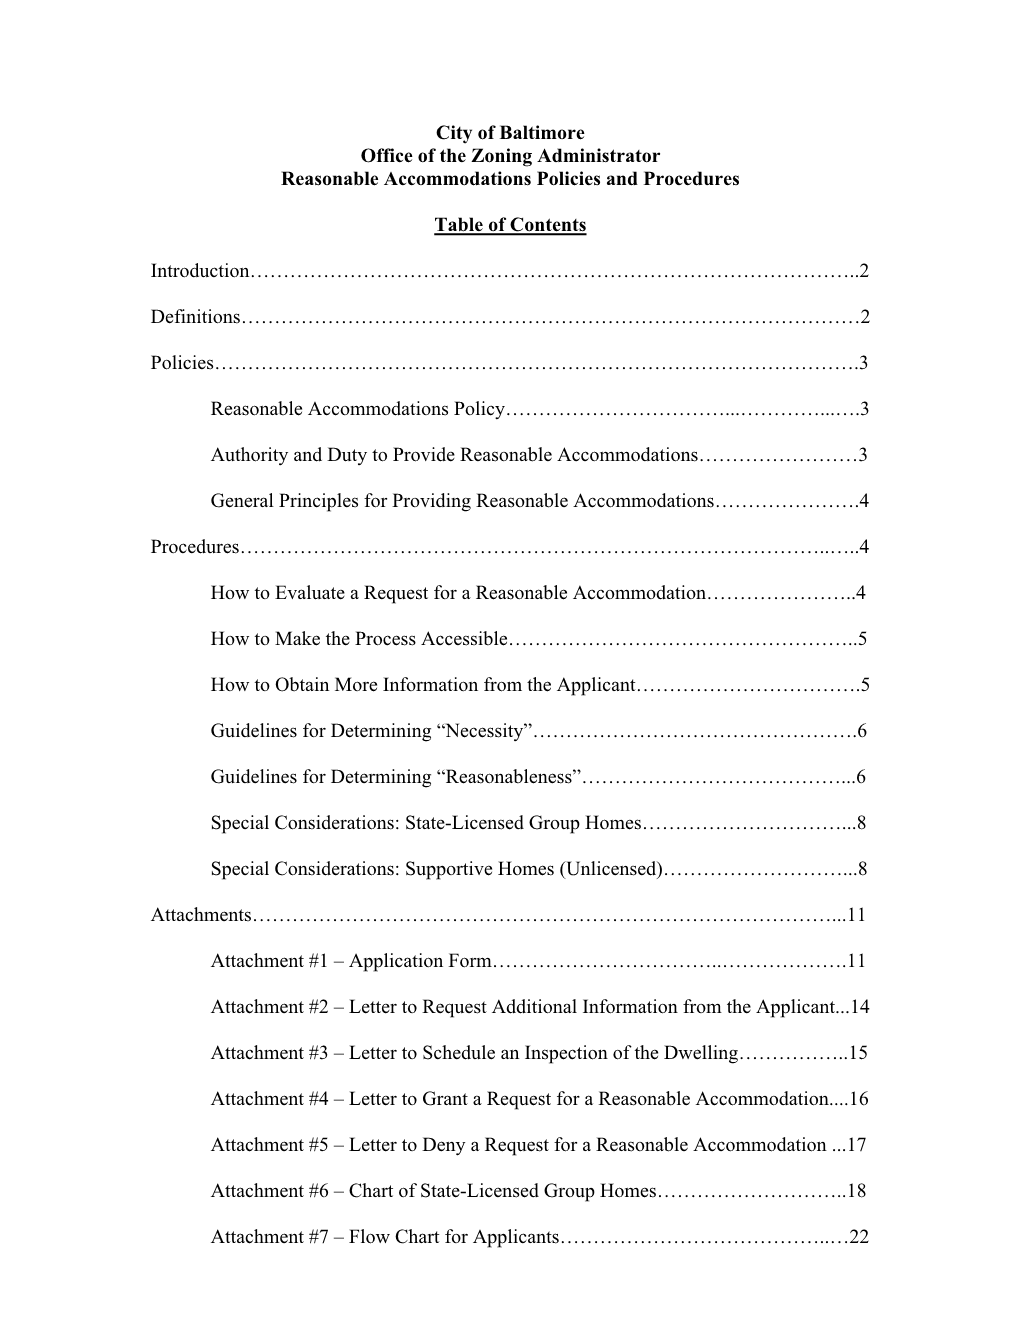 City of Baltimore Office of the Zoning Administrator Reasonable Accommodations Policies and Procedures